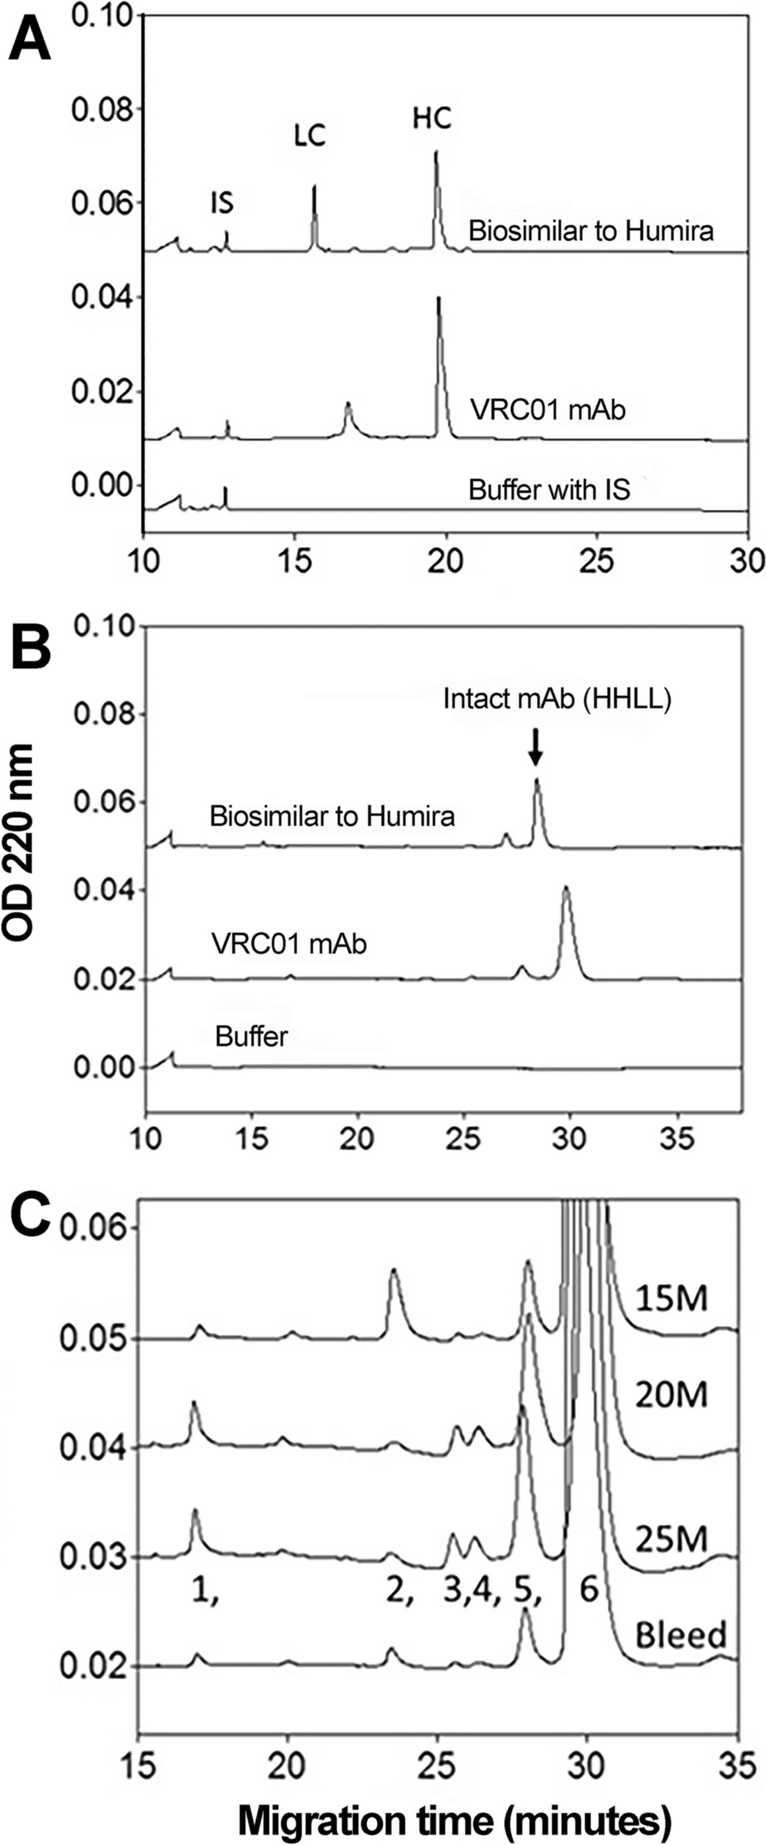 Effects of process intensification on homogeneity of an IgG1:κ monoclonal antibody during perfusion culture